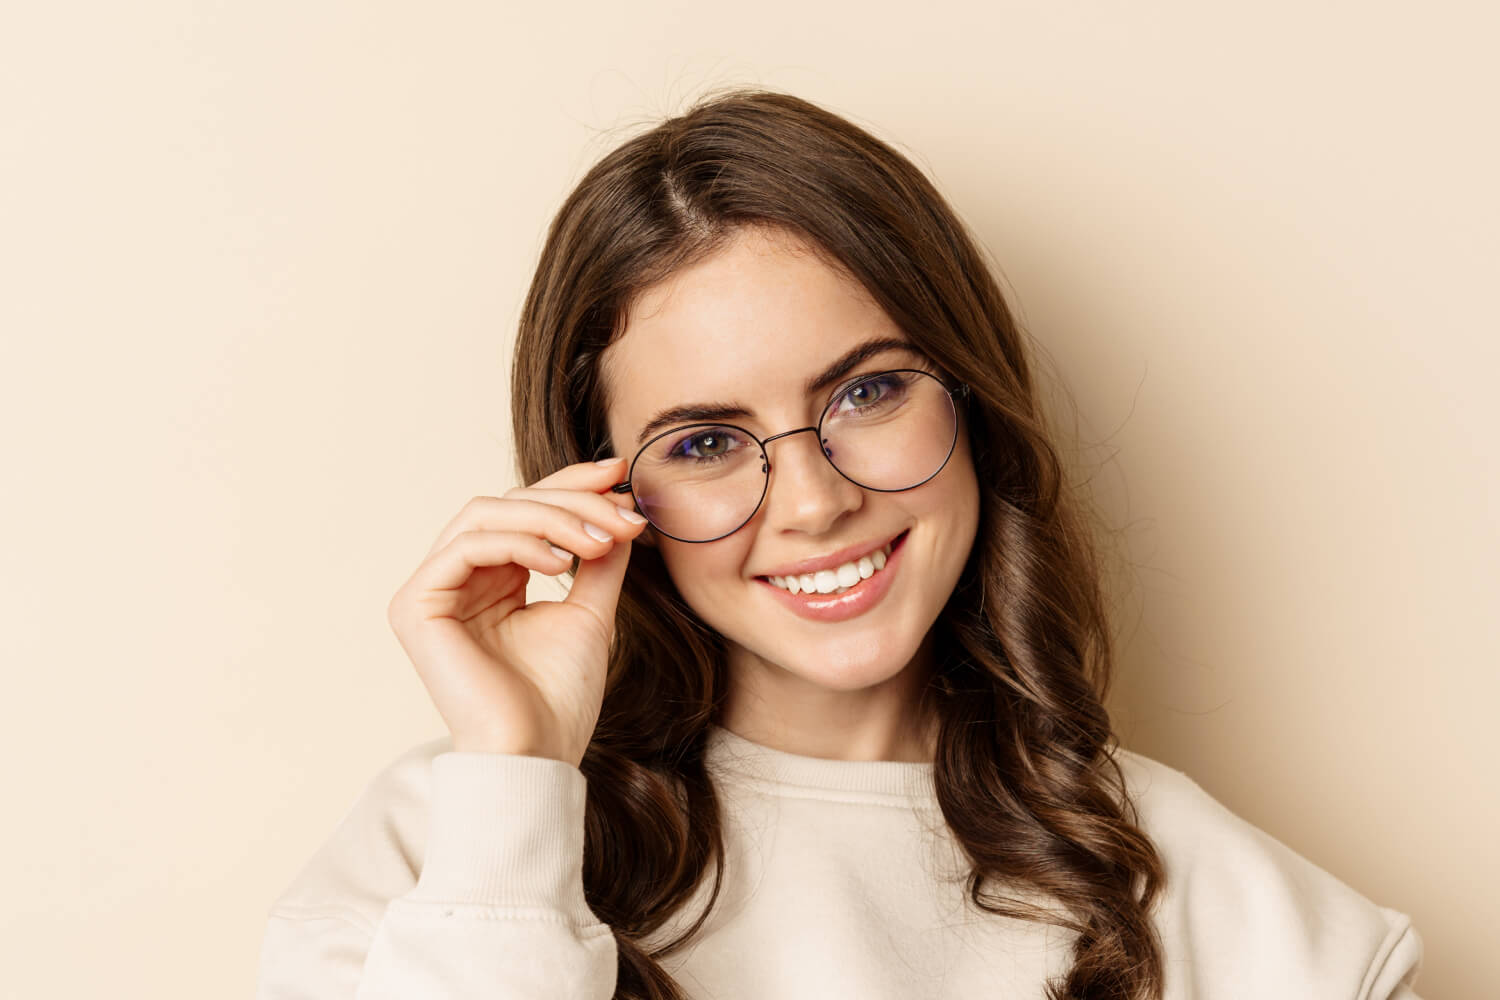 How to Wear Makeup With Glasses: 7 Tips